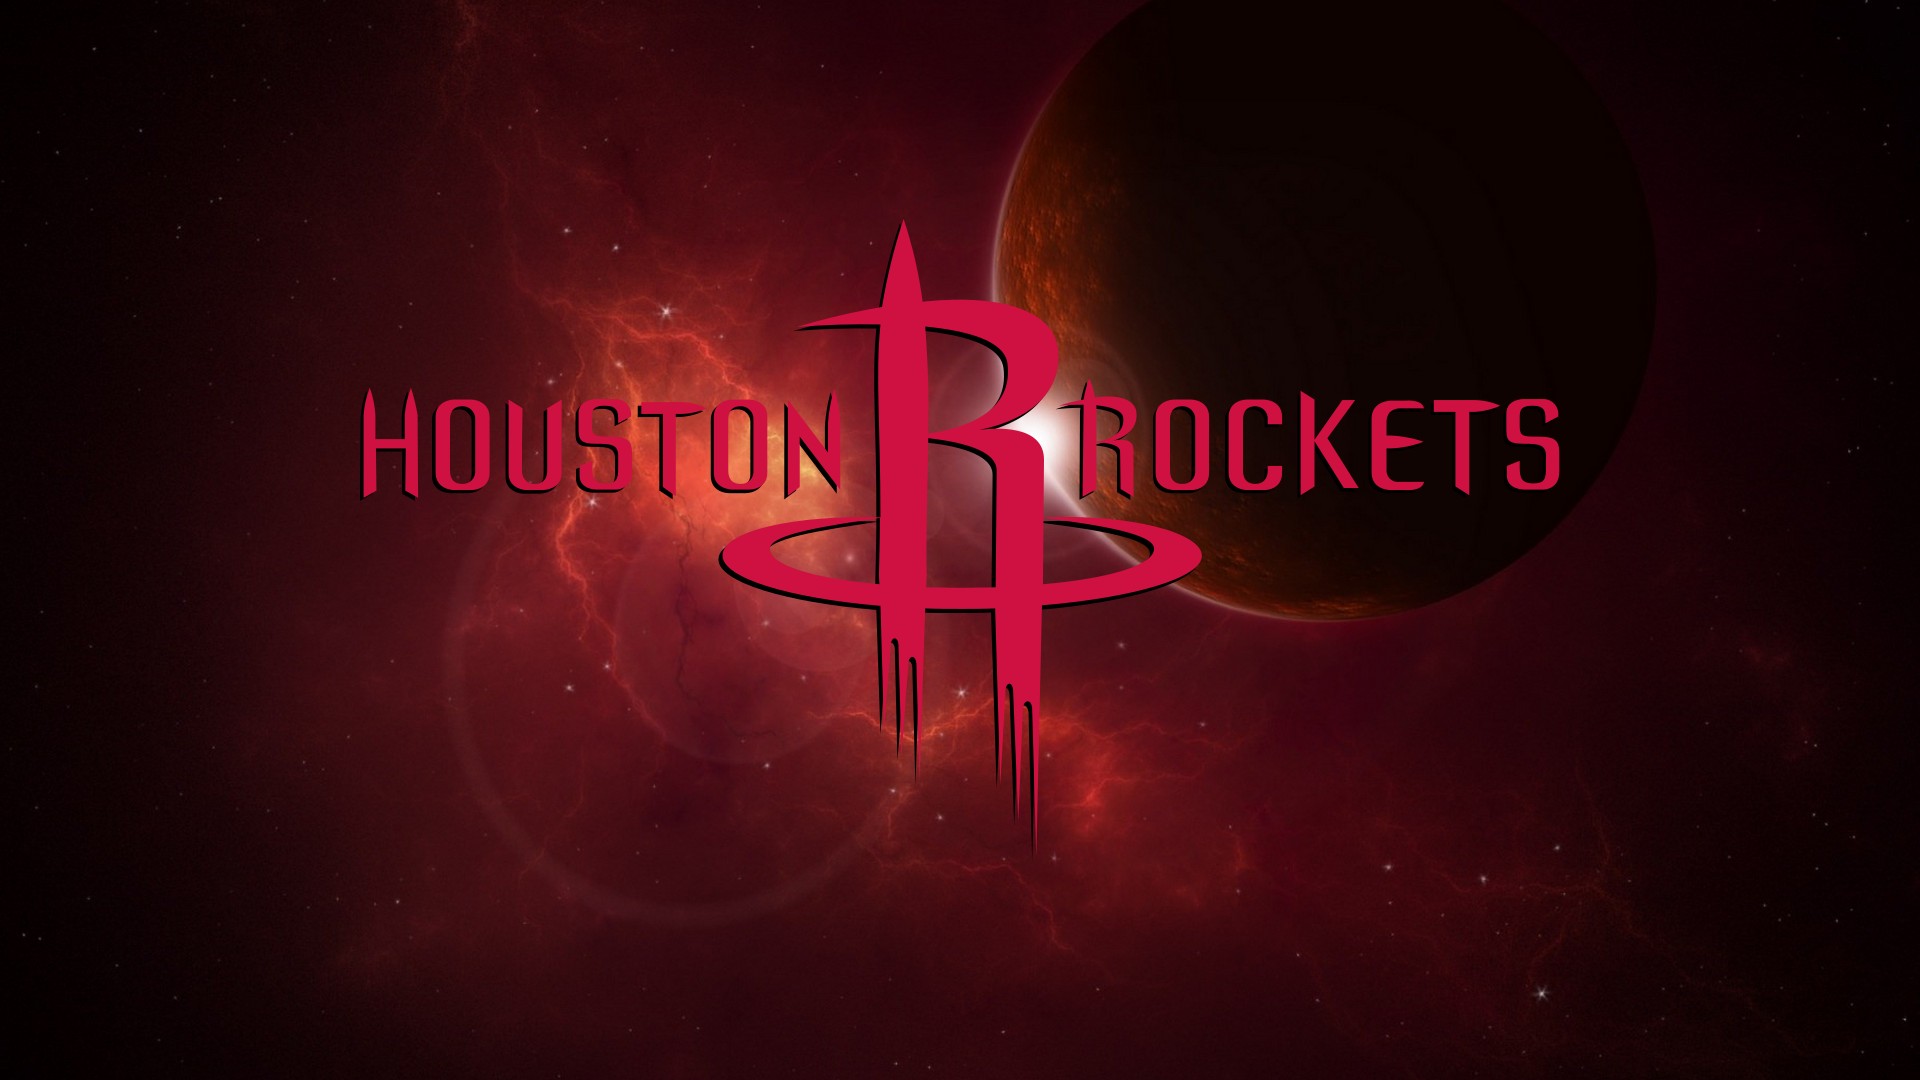 Houston Rockets Desktop Wallpaper with image dimensions 1920x1080 pixel. You can make this wallpaper for your Desktop Computer Backgrounds, Windows or Mac Screensavers, iPhone Lock screen, Tablet or Android and another Mobile Phone device